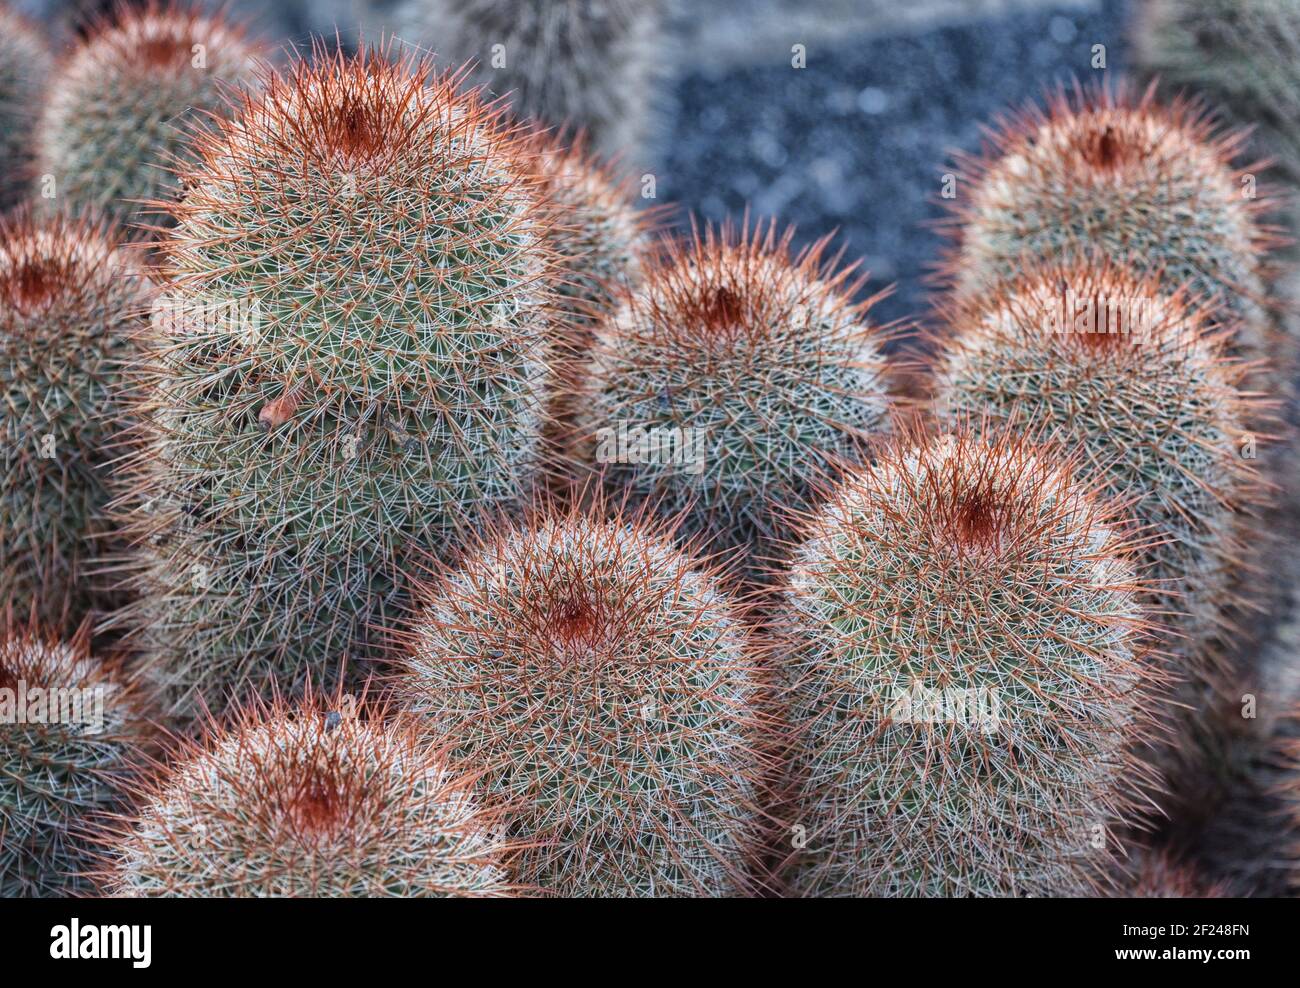 Mammillaria spinosissima also known as the spiny pincushion cactus is native to Mexico, Guerrero and Morelos. Stock Photo